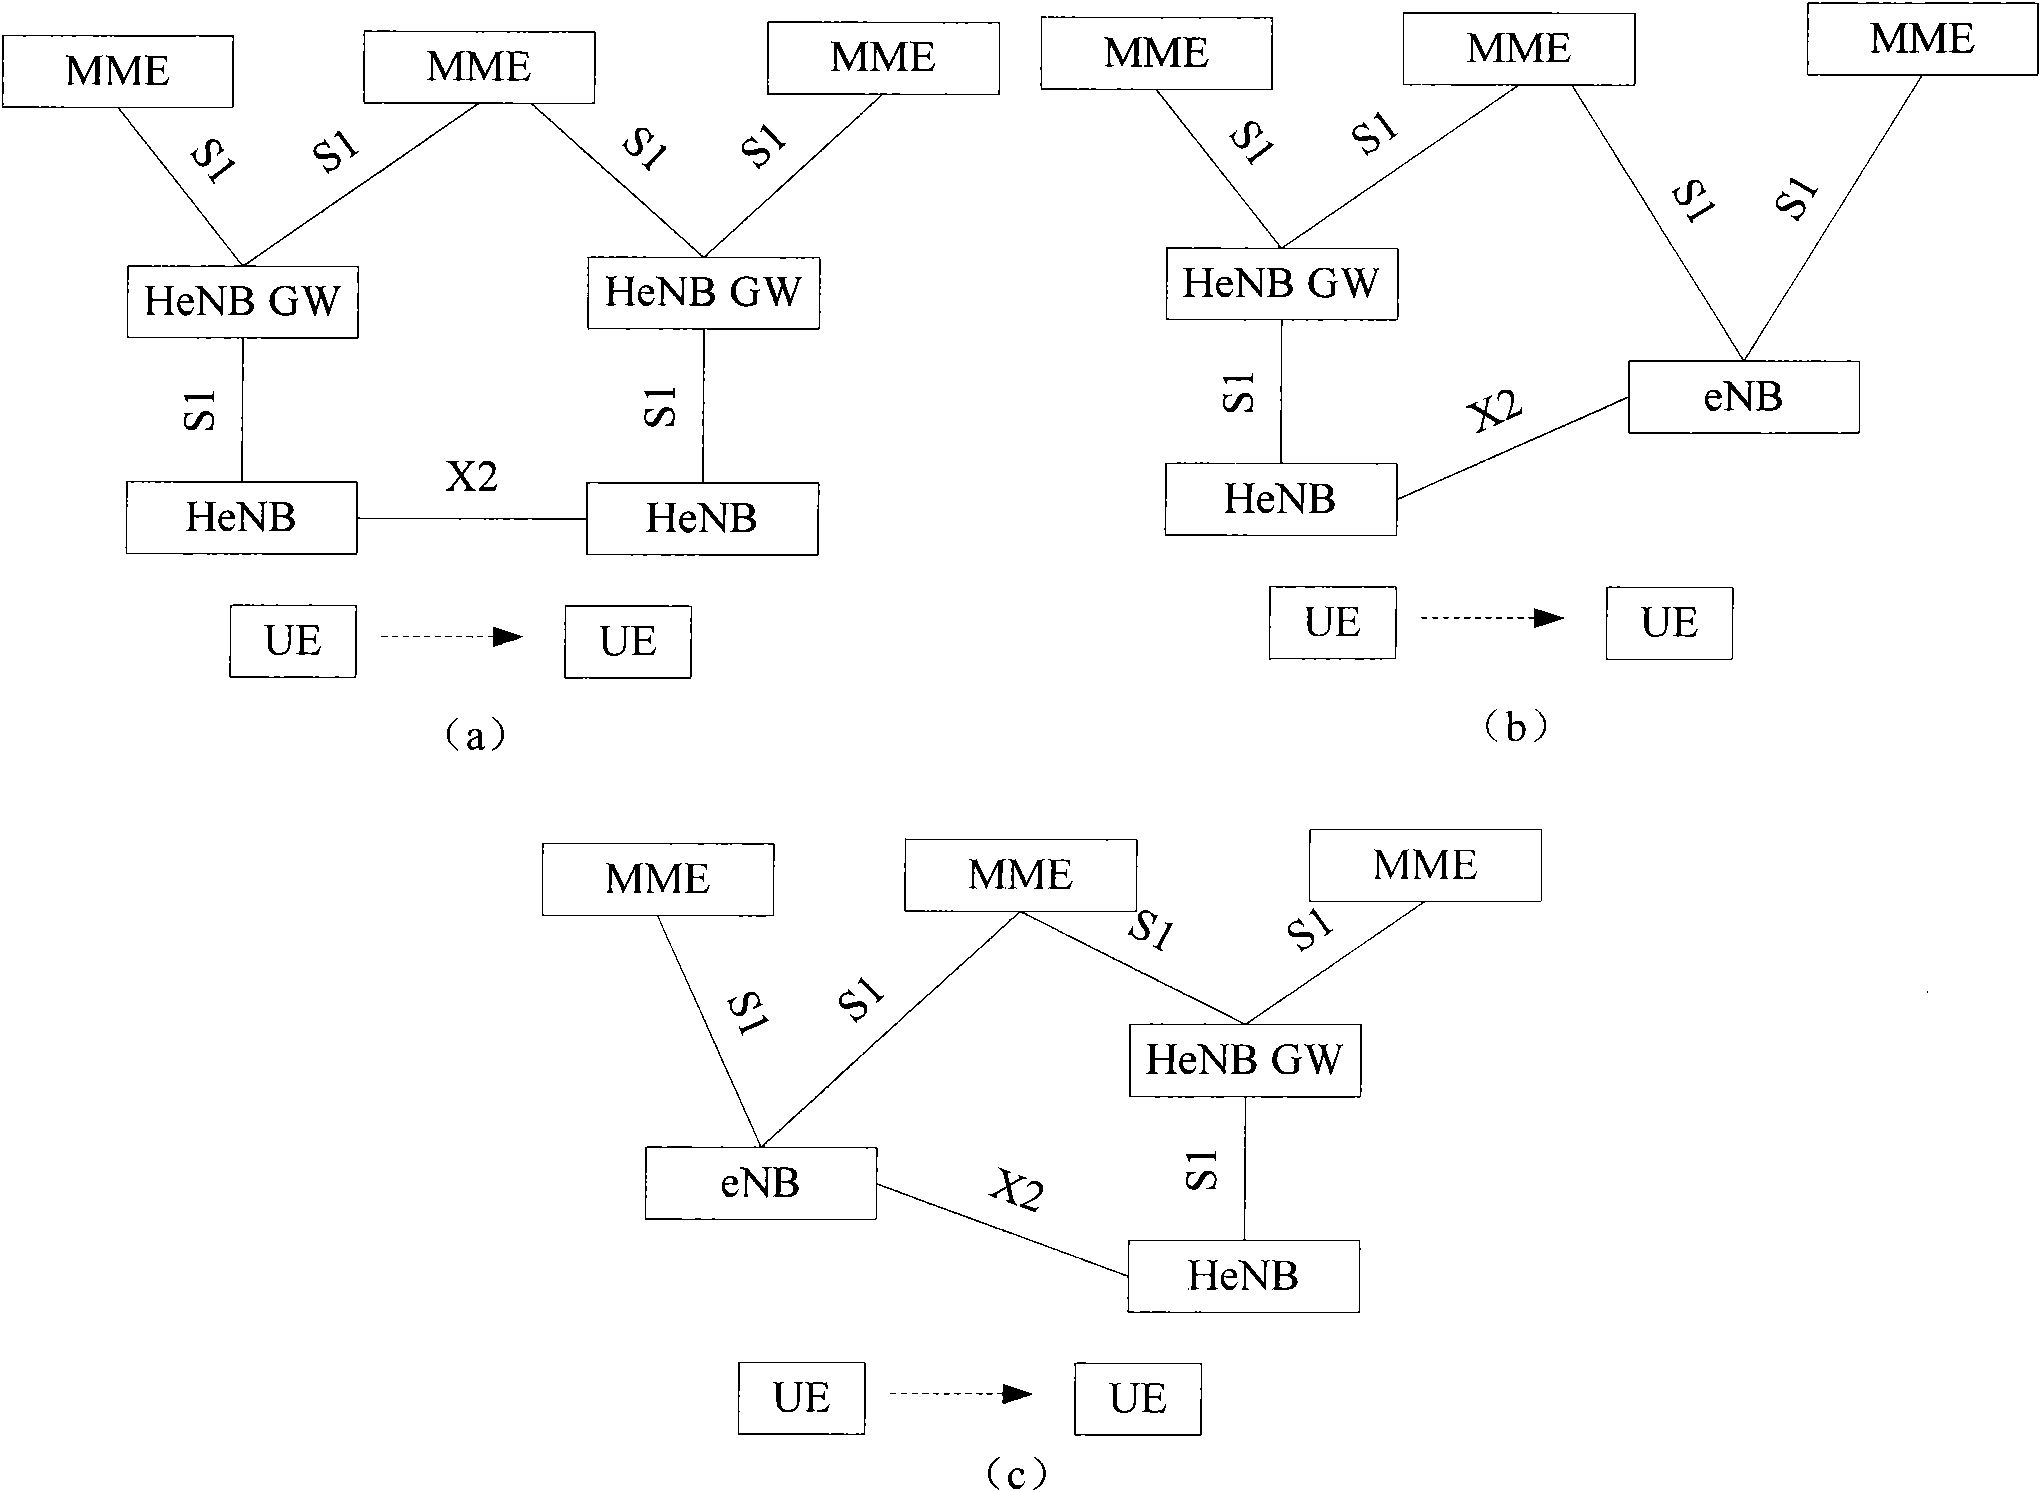 Method for performing X2 switch through HeNB (home evolved NodeB)